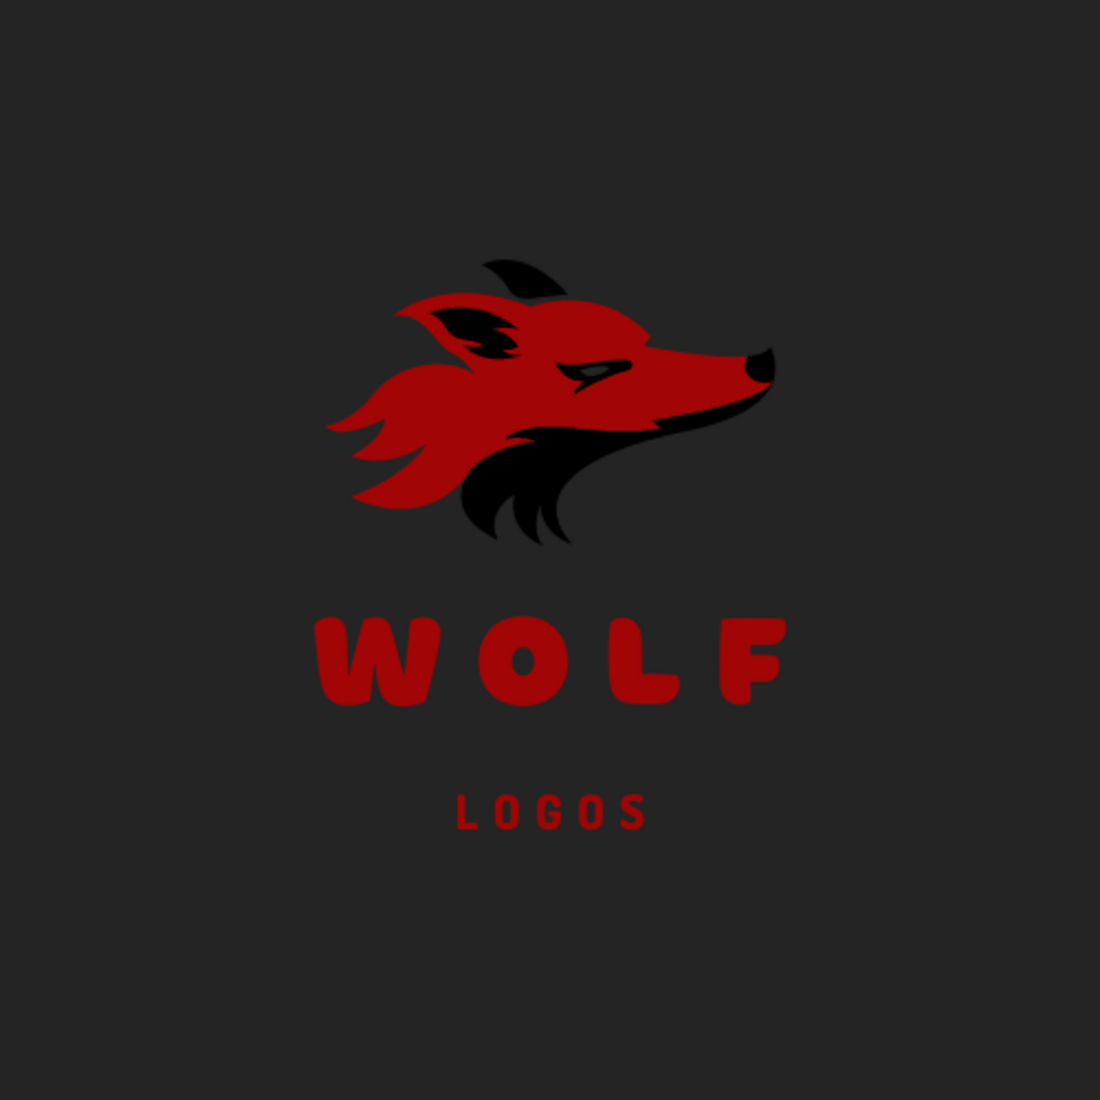 Cool Wolf logo in 3 colors : Red, Blue, Green and the text can be edited later to write what you want preview image.